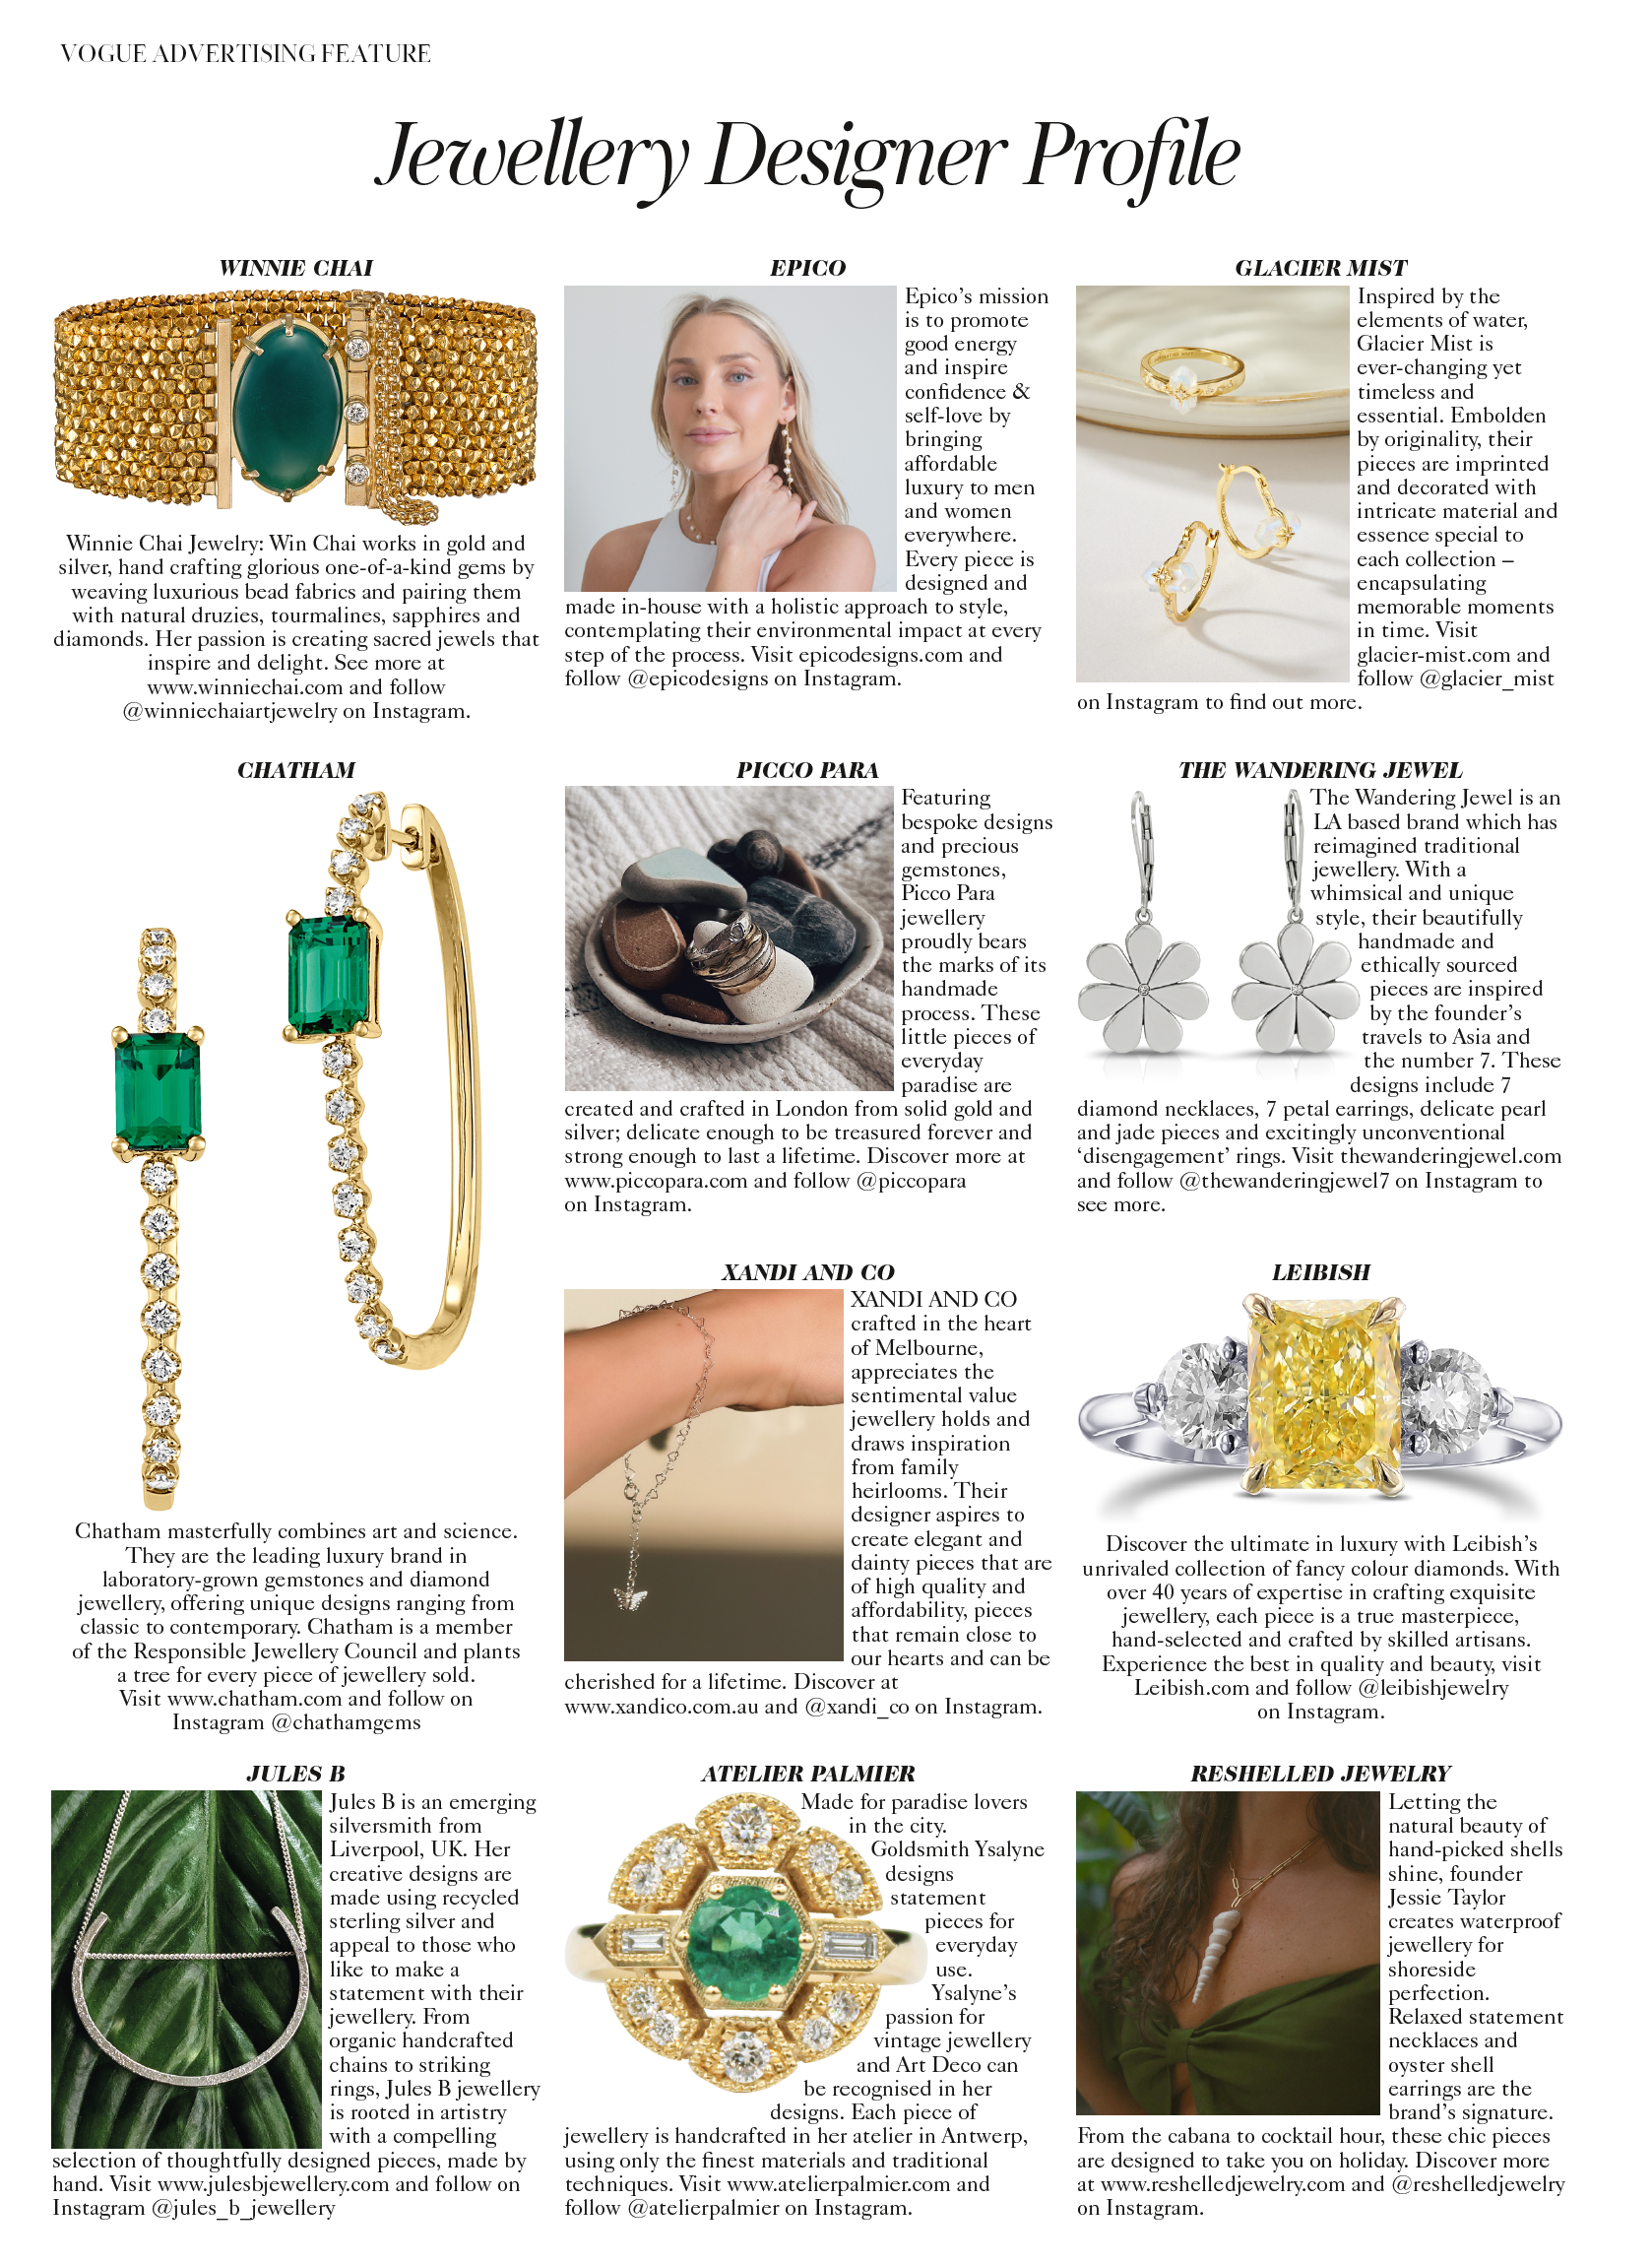 vogue magazine Jewelry designer profile featuring the 7 petal earrings from the wandering jewel